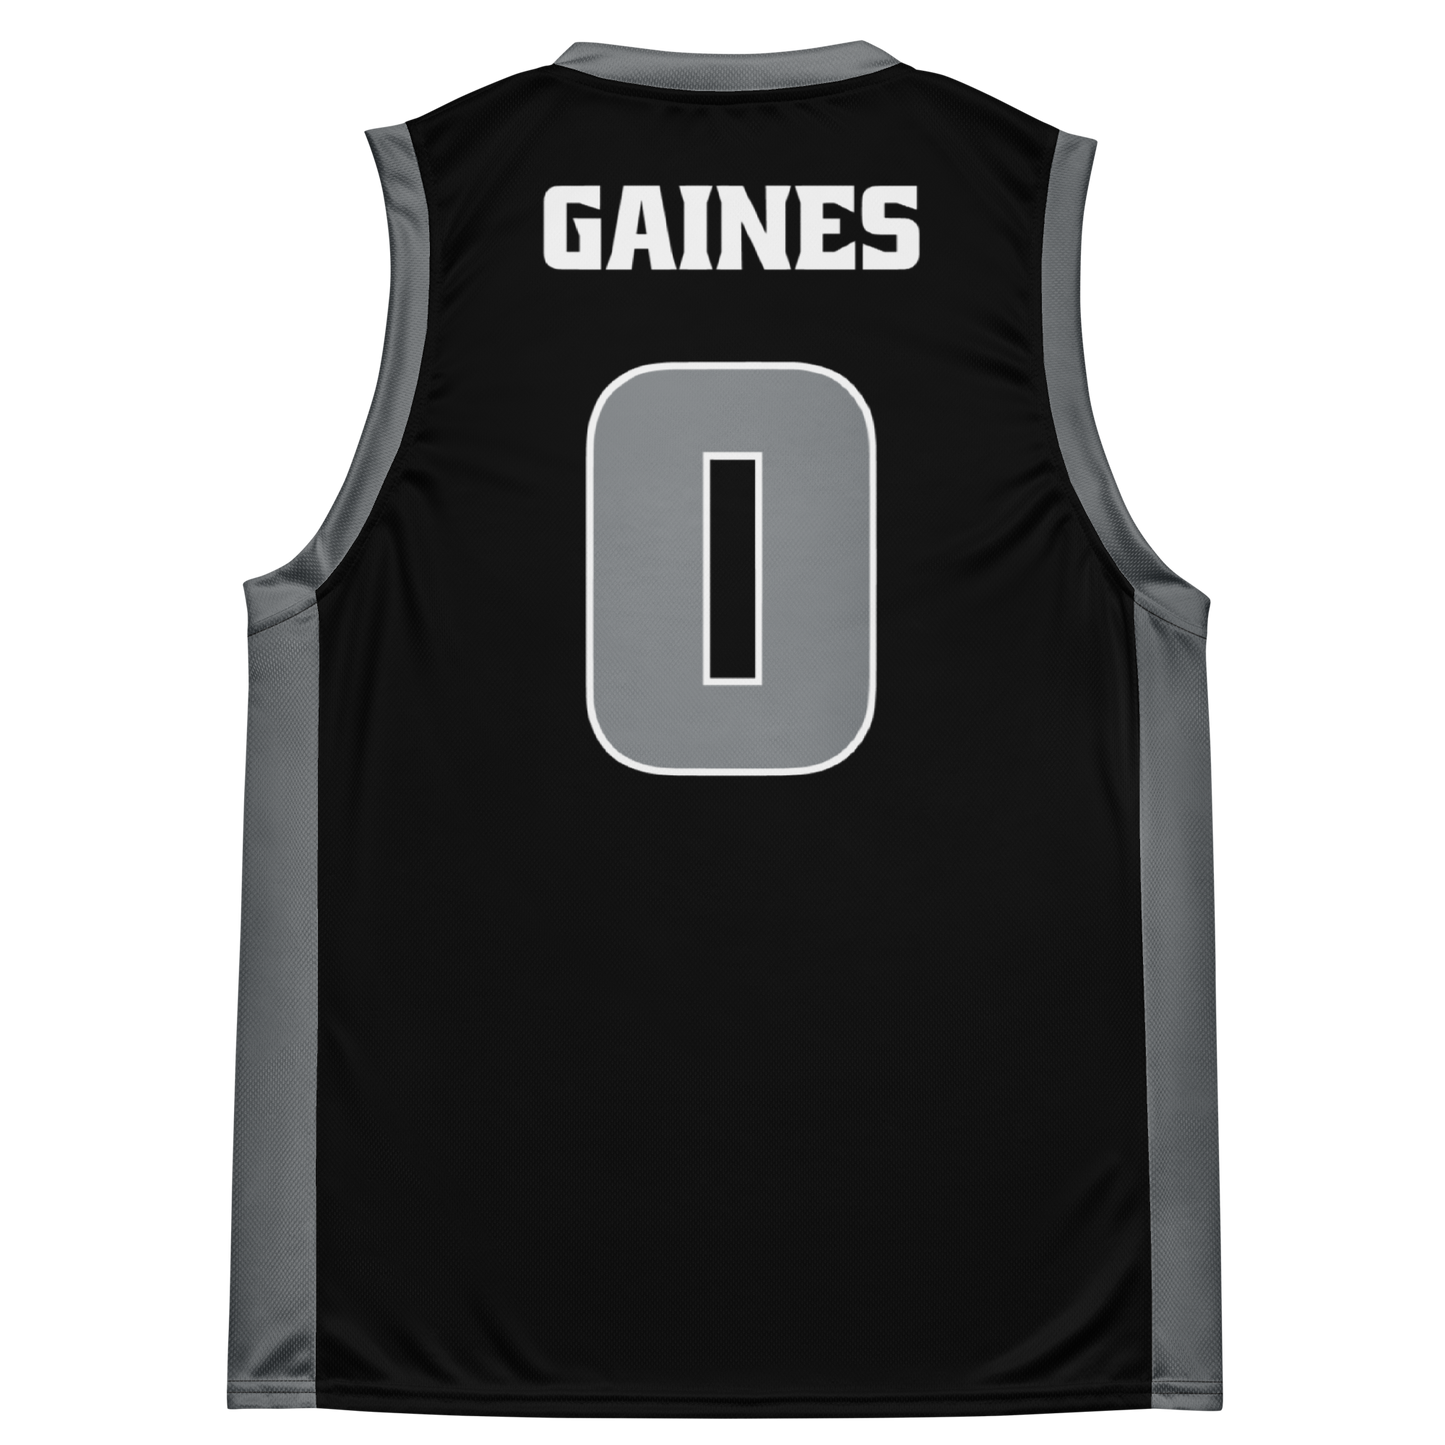 TICKET GAINES HOME SHIRTSY